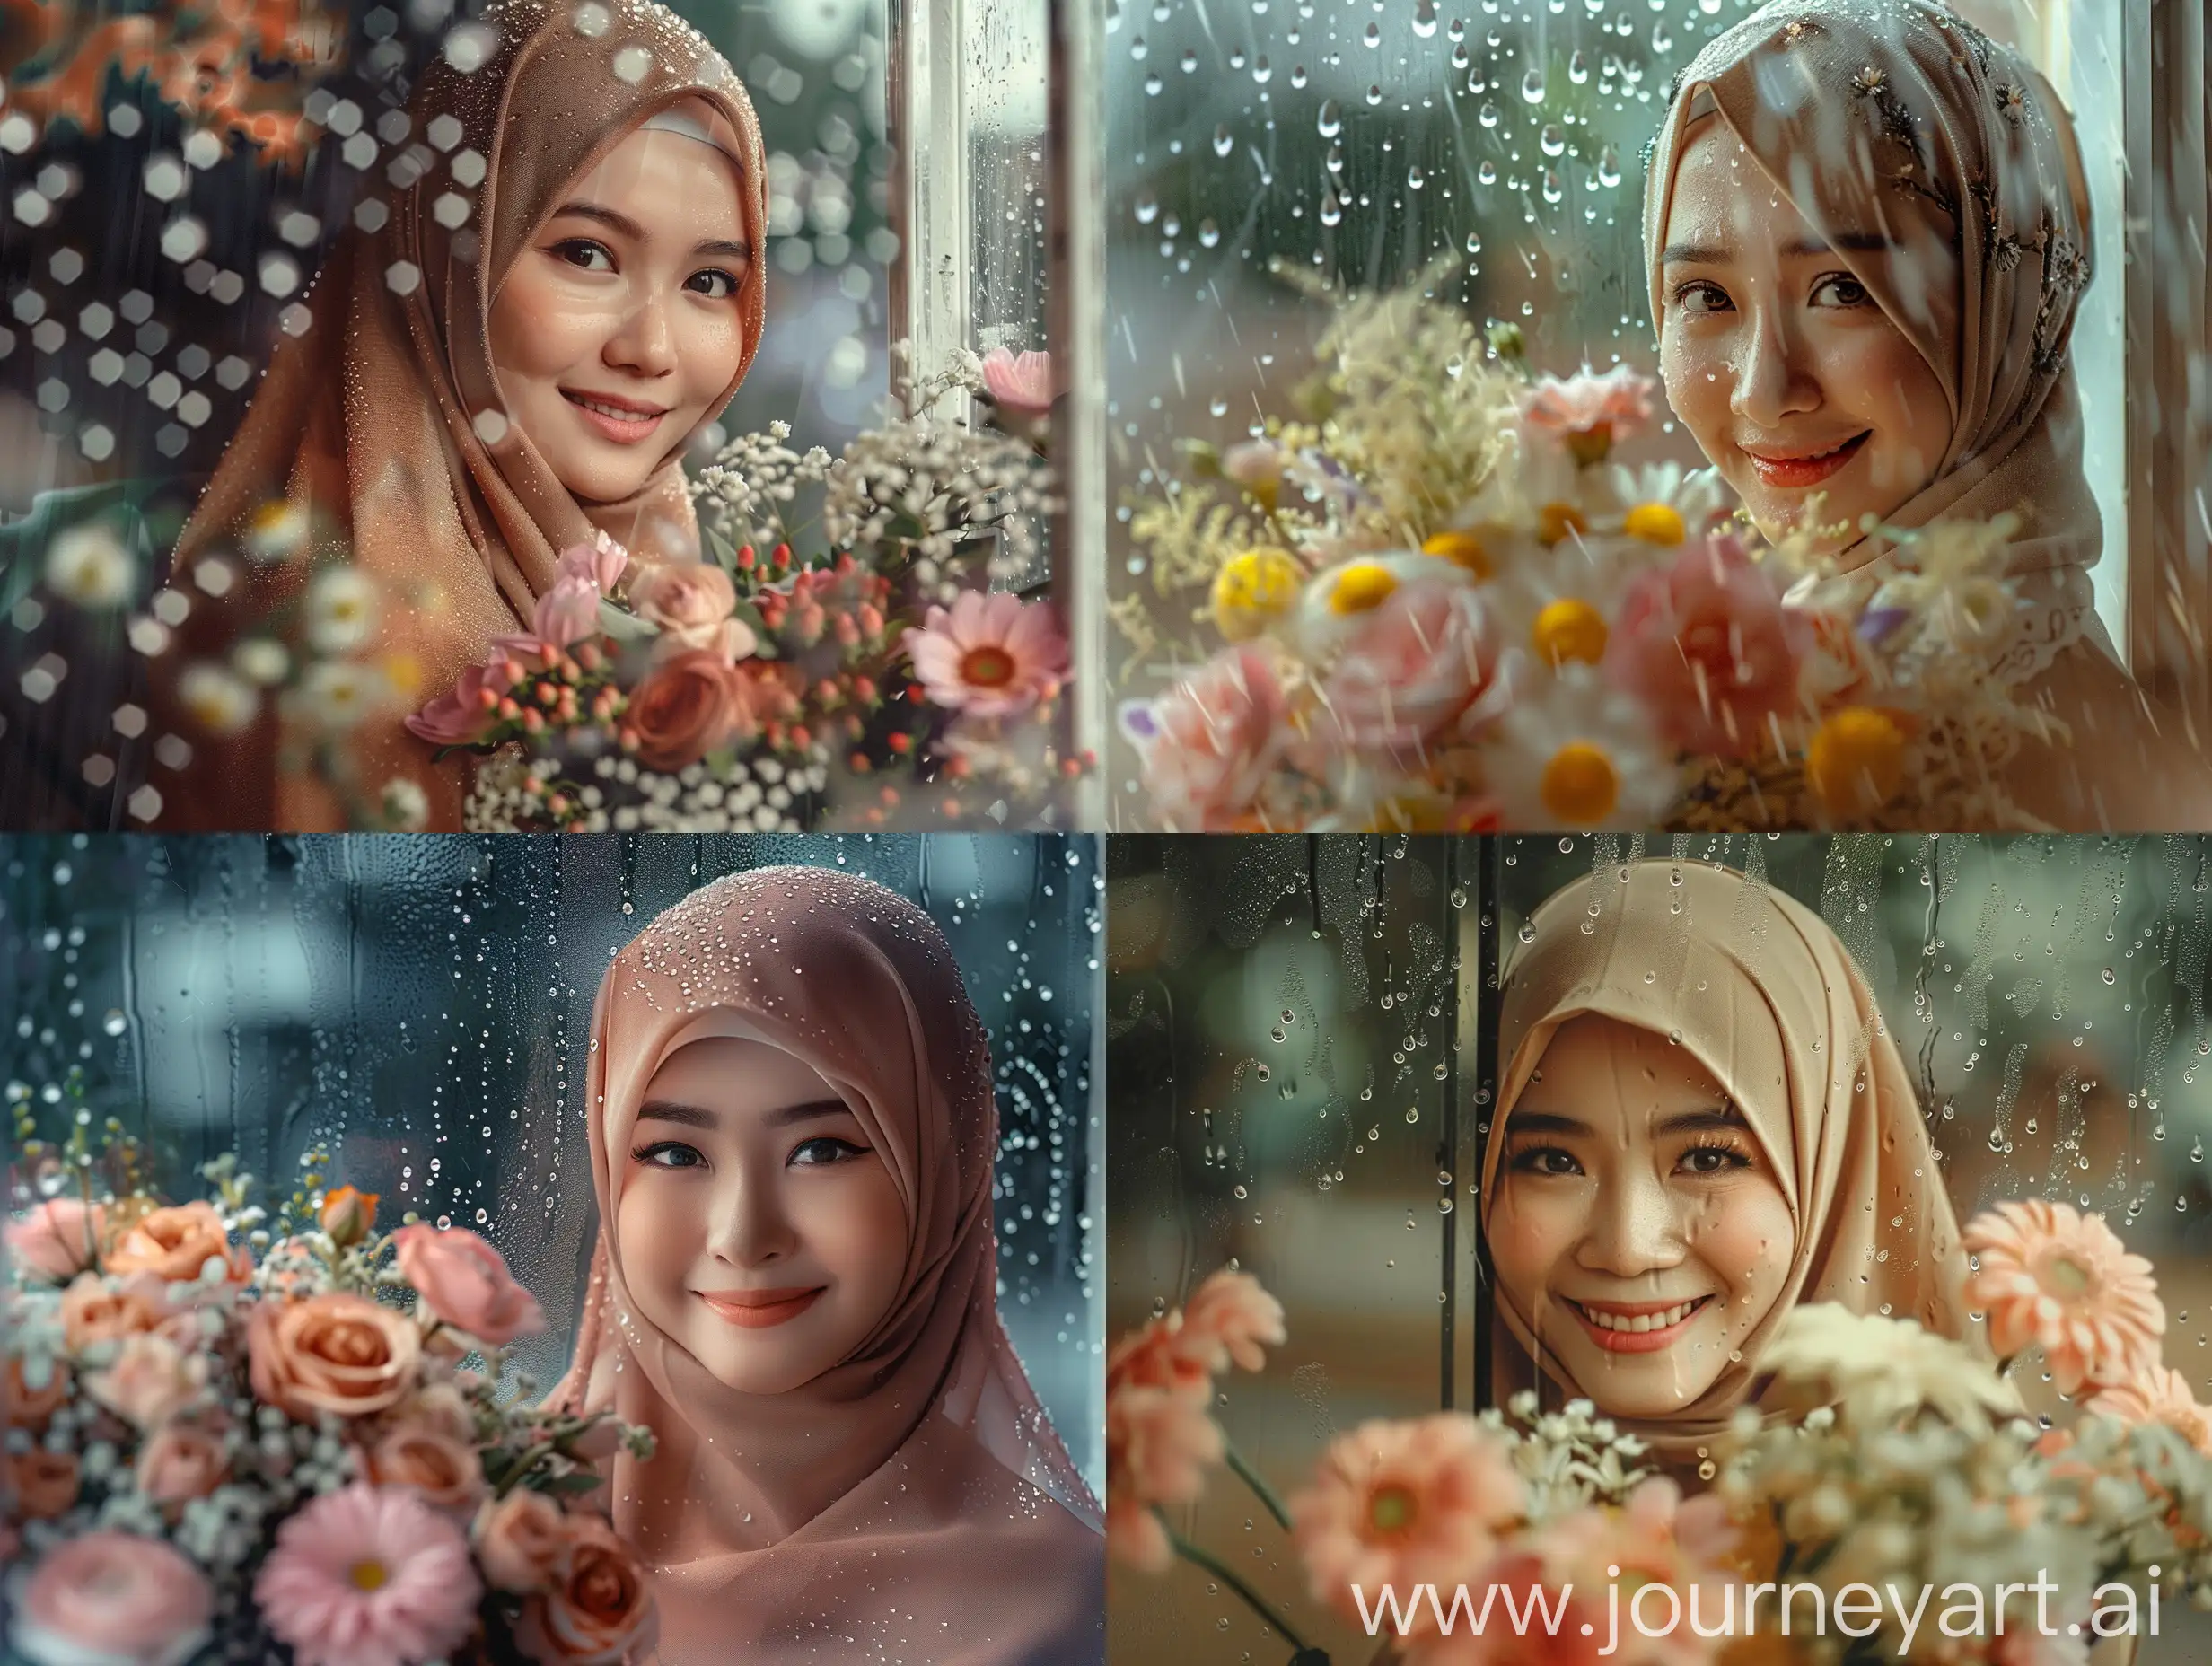 Indonesian-Woman-in-Hijab-Smiling-Behind-RaindropTouched-Window-with-Flowers